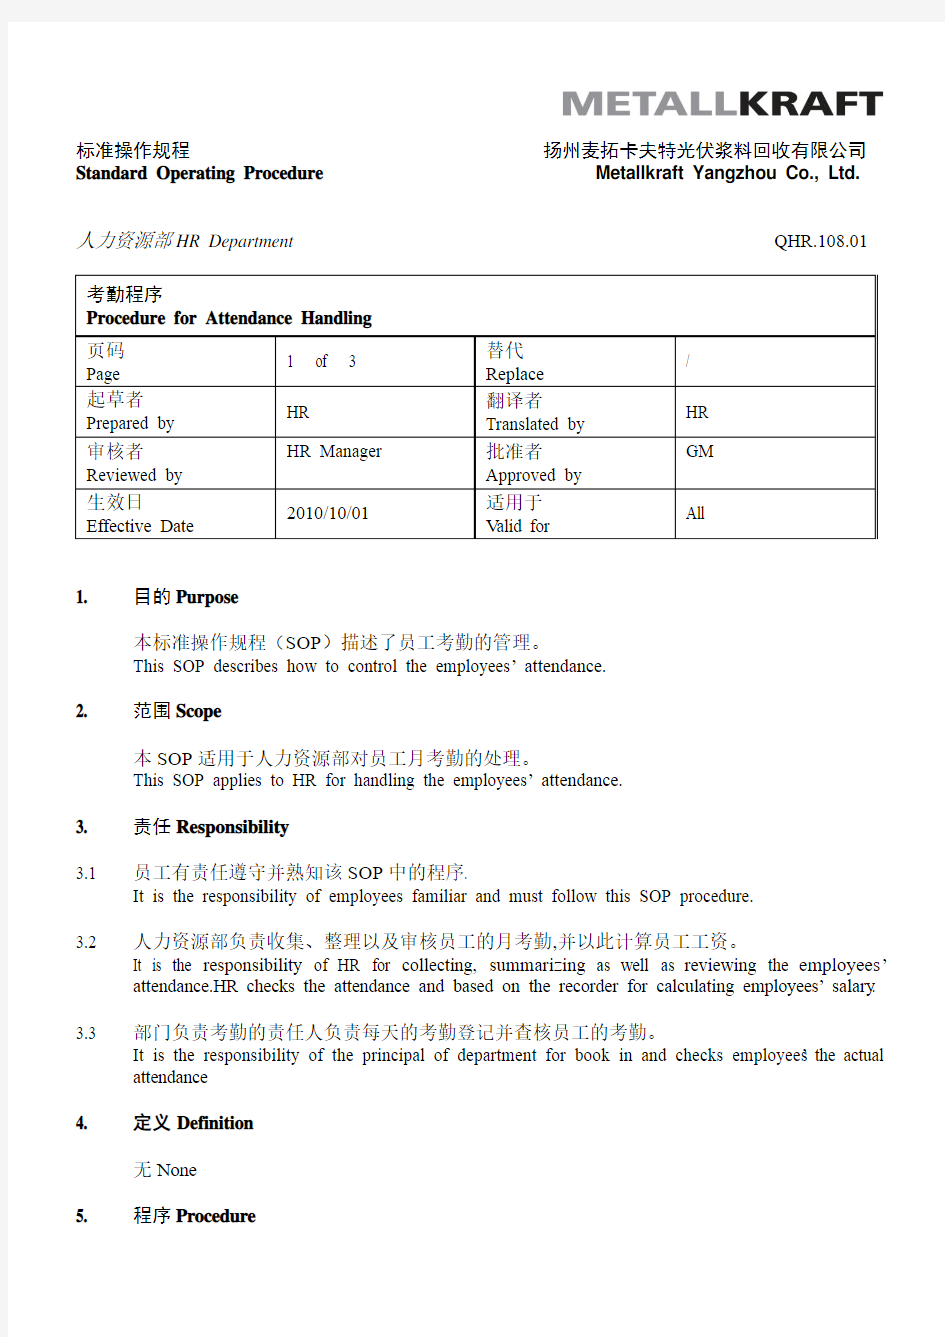 QHR.108.01-Procedure for Attendance Recording, Review and Handling-考勤程序